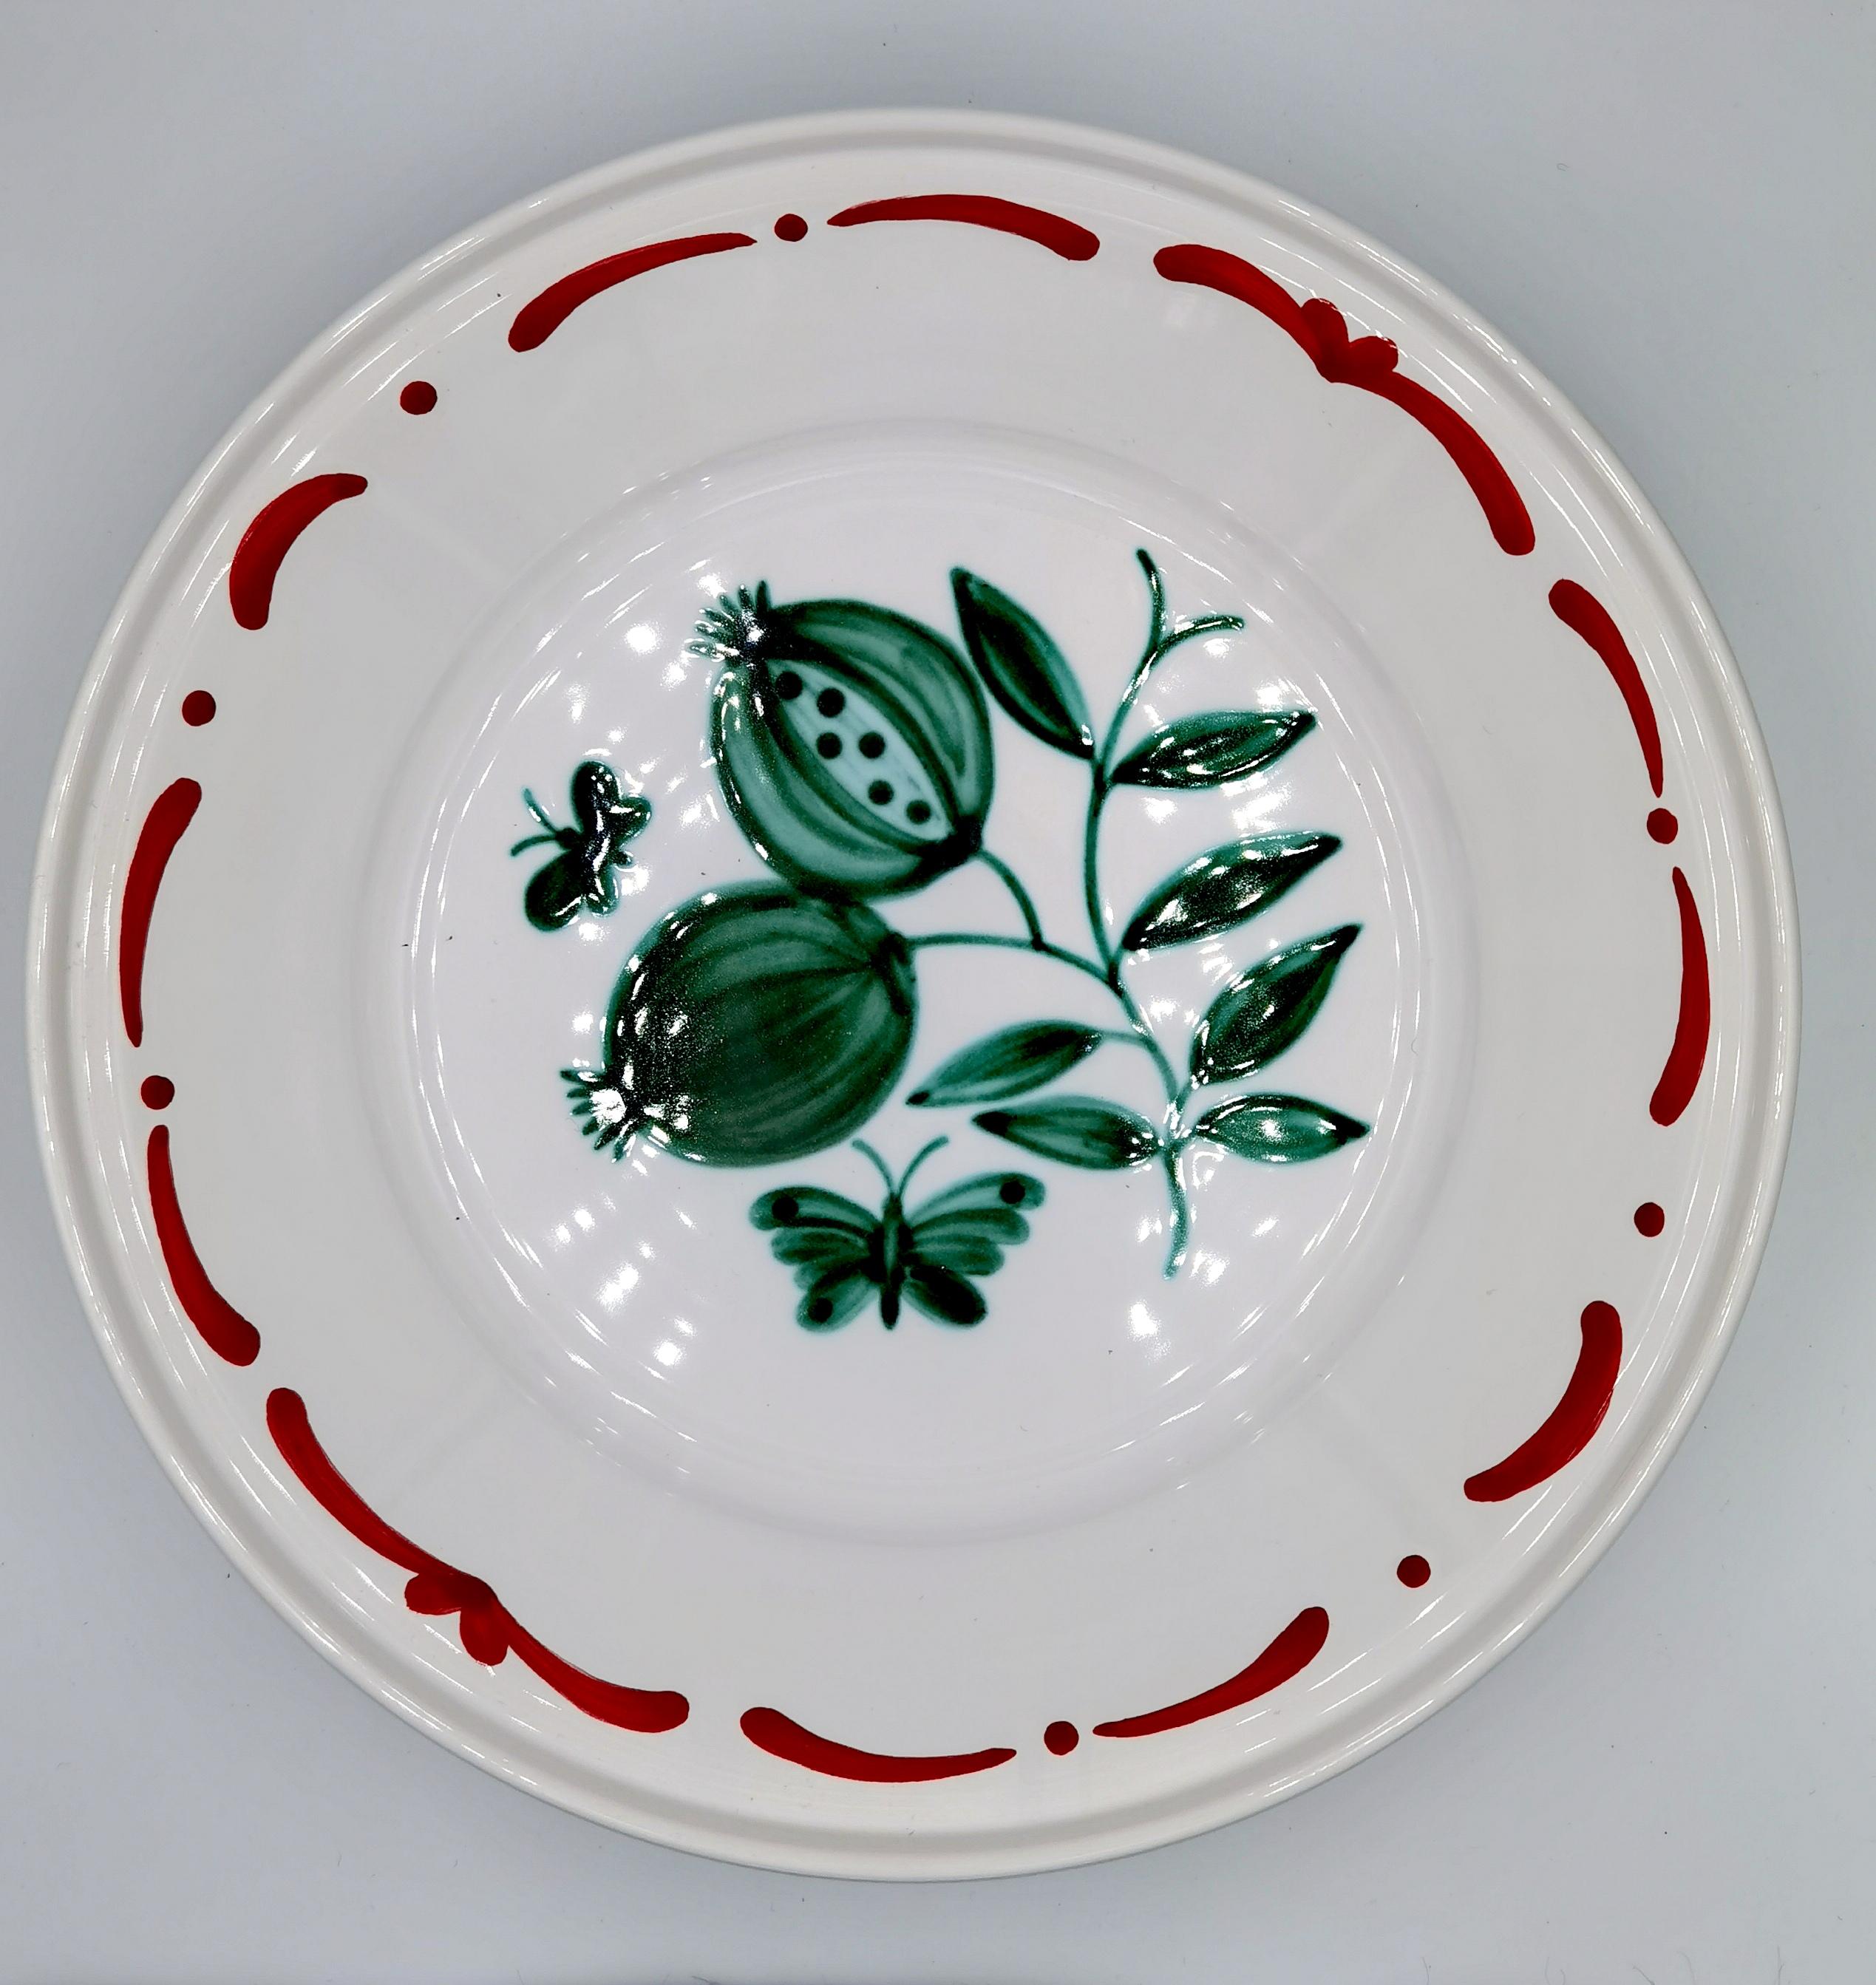 Large hands-free painted pottery dish in country style. Decorated with a handpainted green pomegranate decor in the center with butterflies and a hands-free painted garlande . The garlande can be ordered in different colors. Produced and handsfree